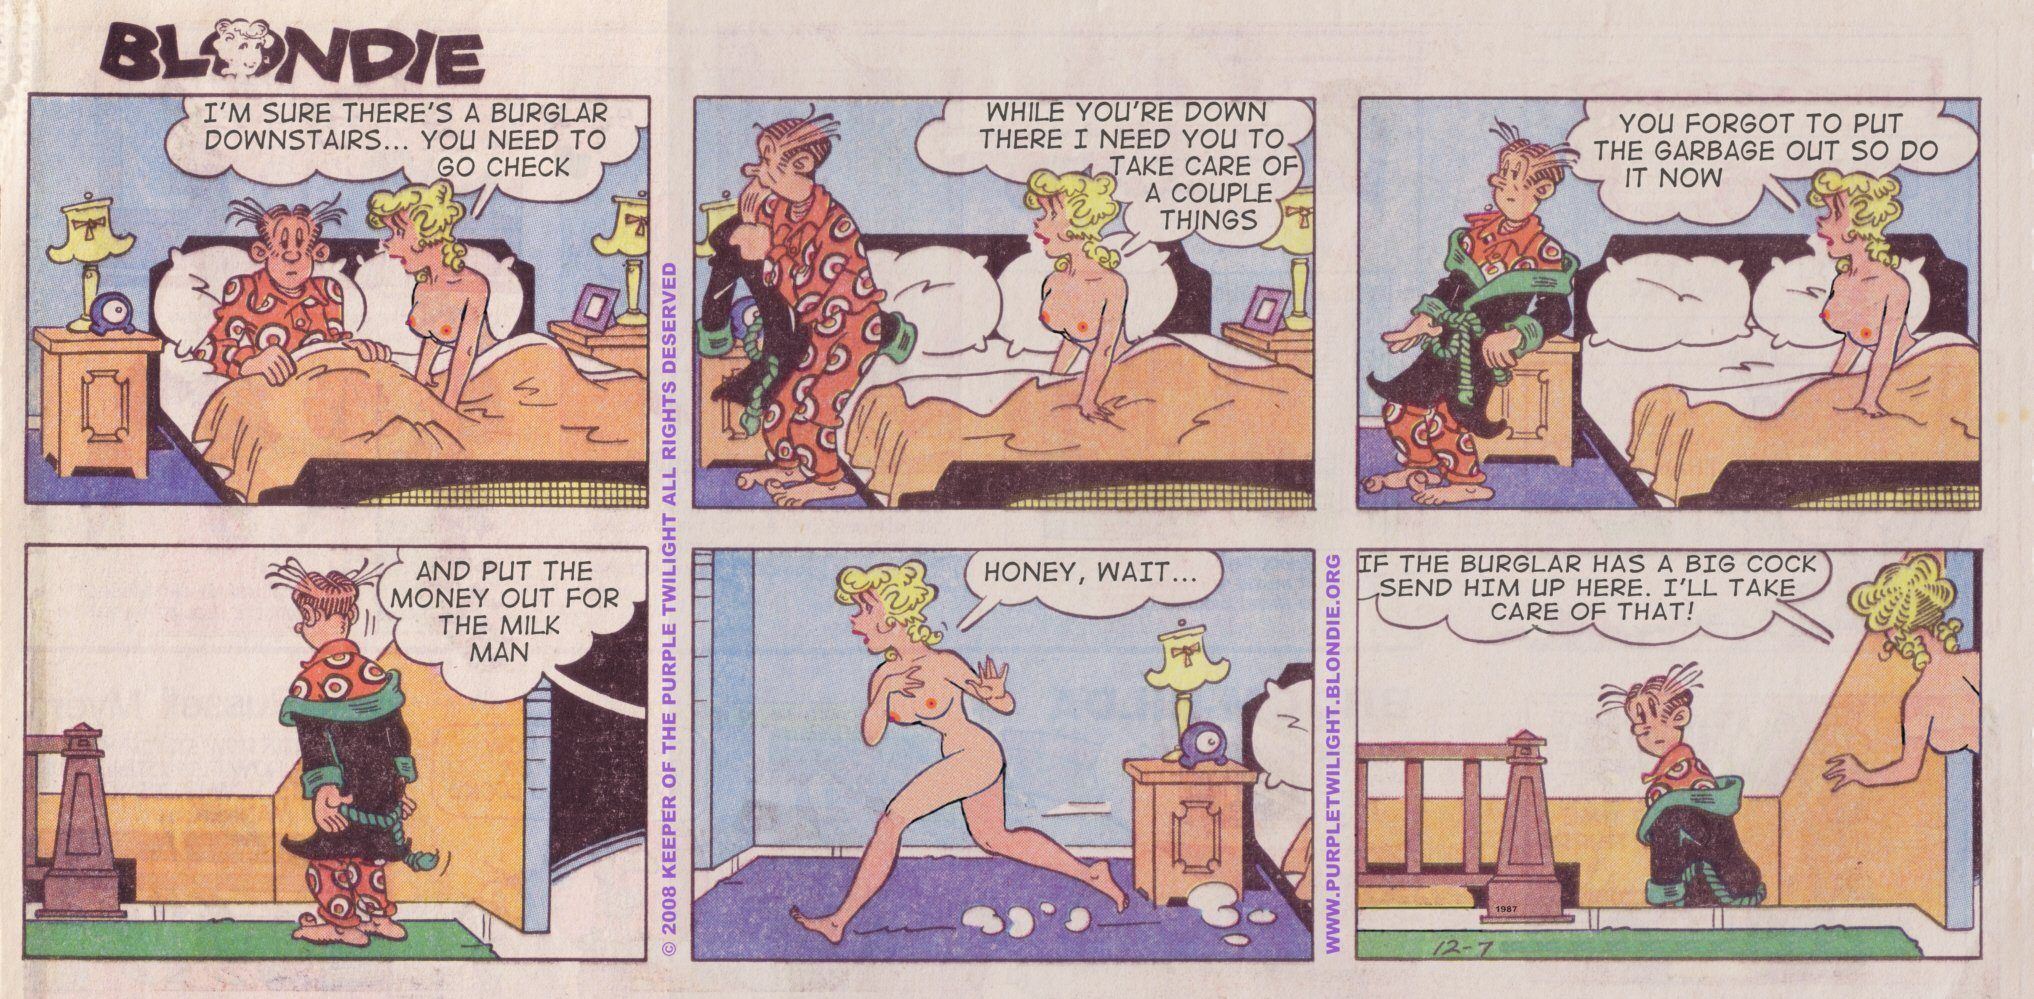 Blondie and dagwood cartoon porn pictures Porno pics hot.